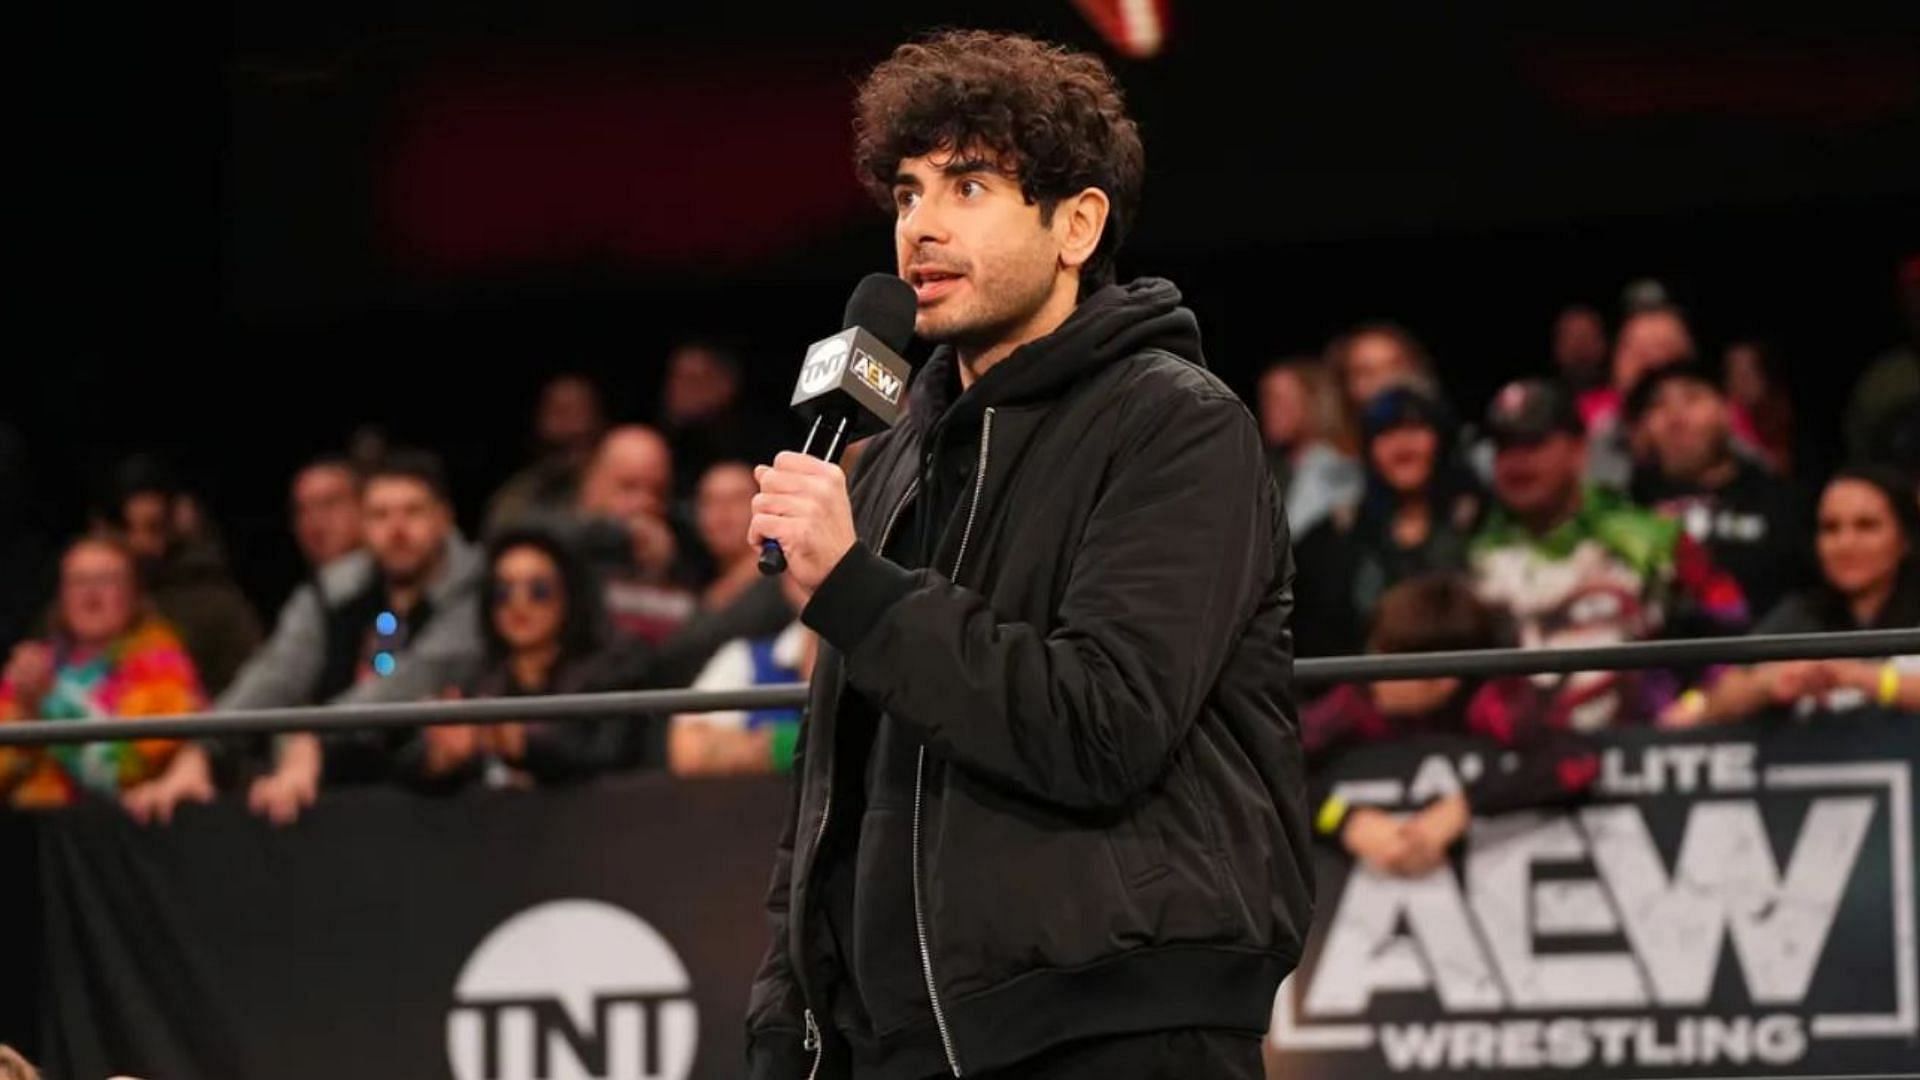 Tony Khan is the CEO and president of AEW